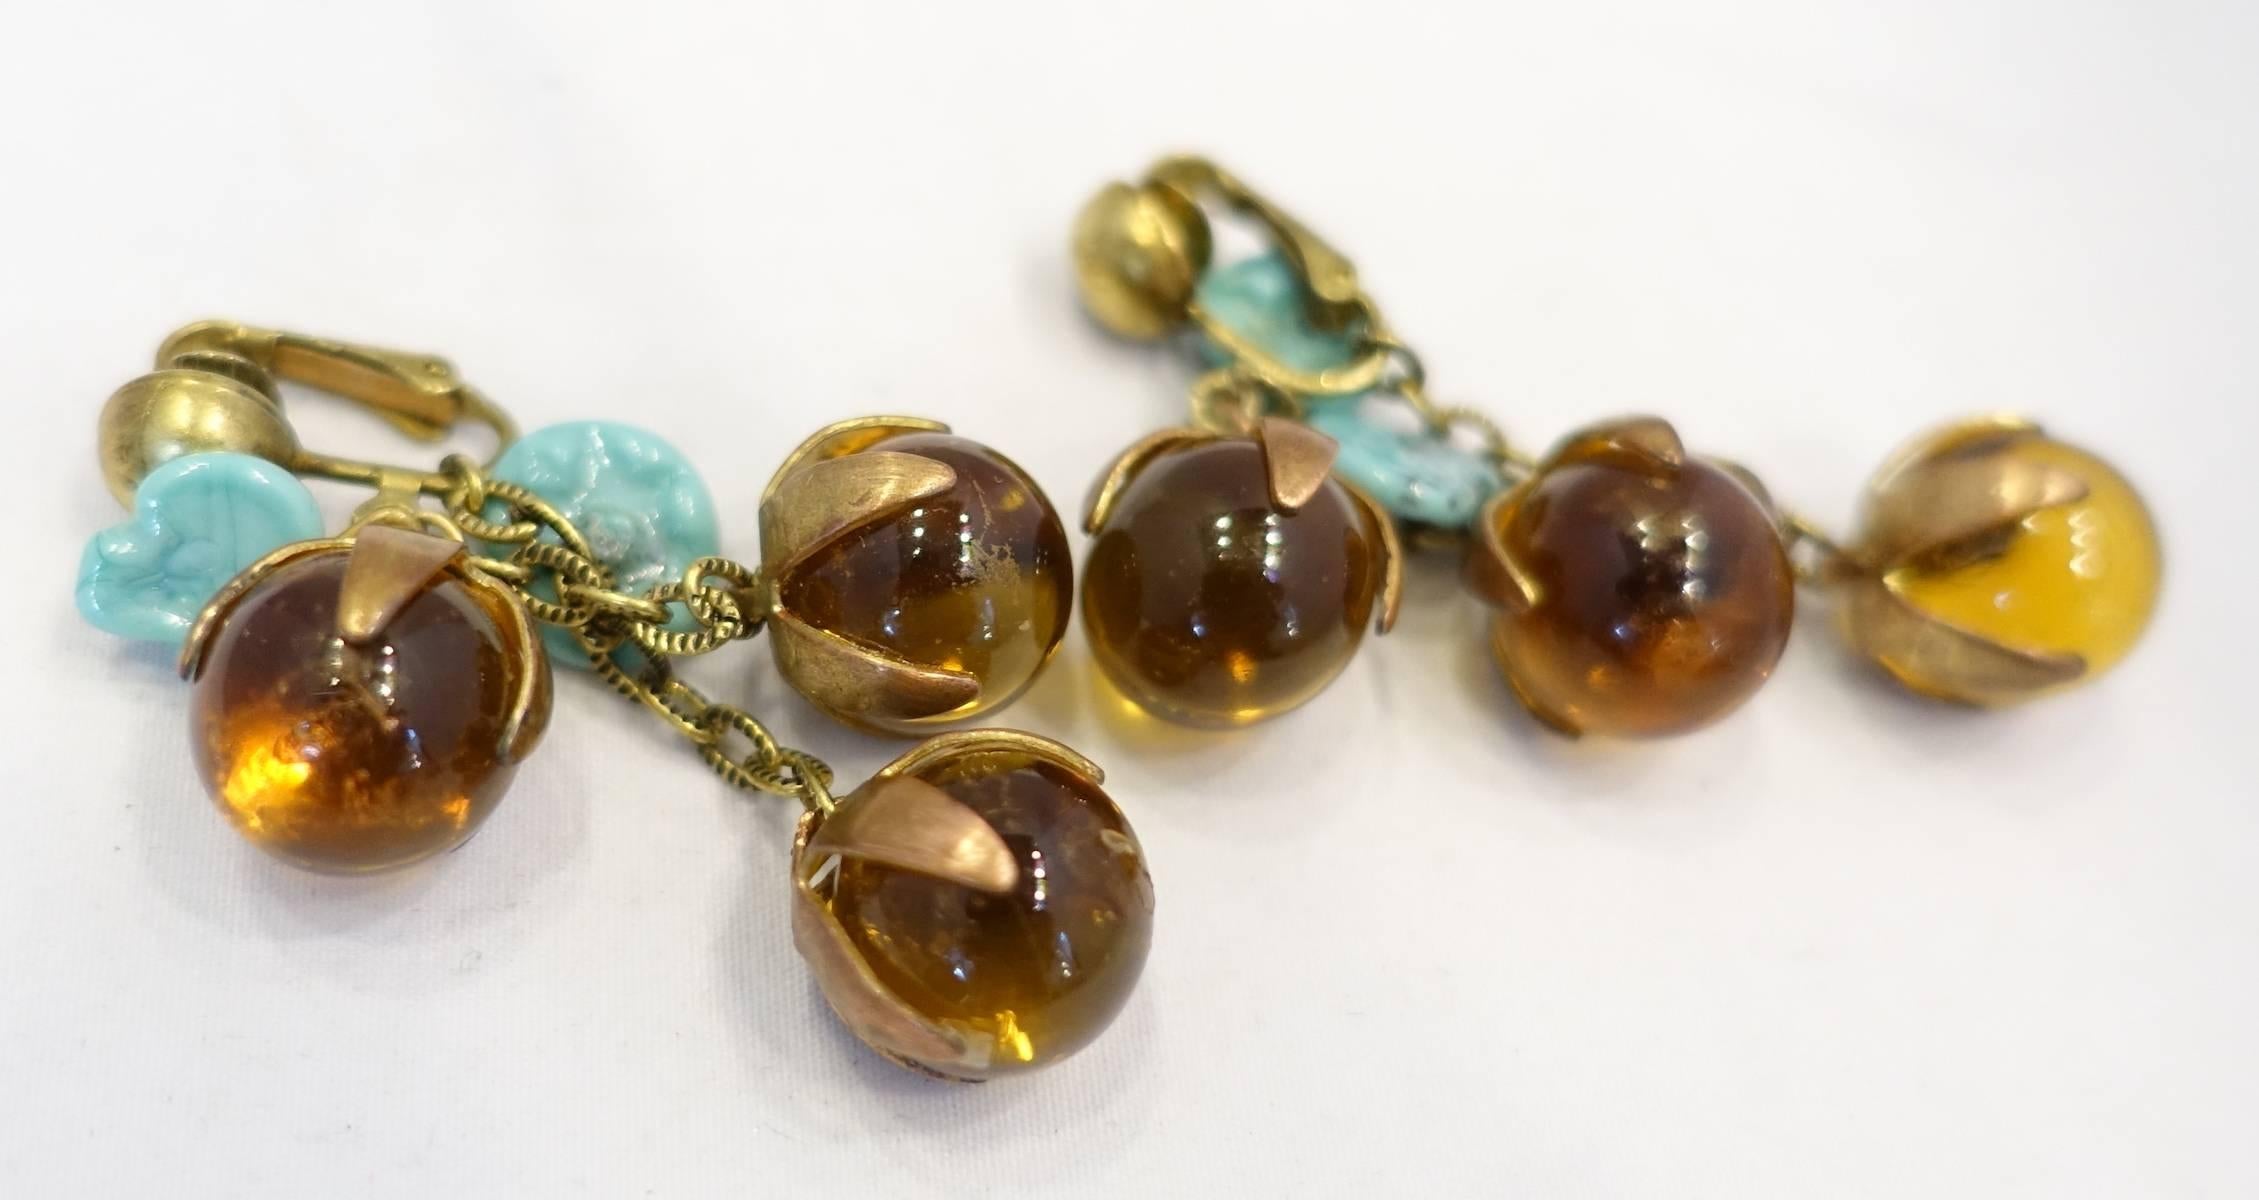 These vintage deco earrings feature amber and turquoise leaves glass beads in a gold tone setting.  These clip earrings measure 2-1/4” x 1” and are in excellent condition.